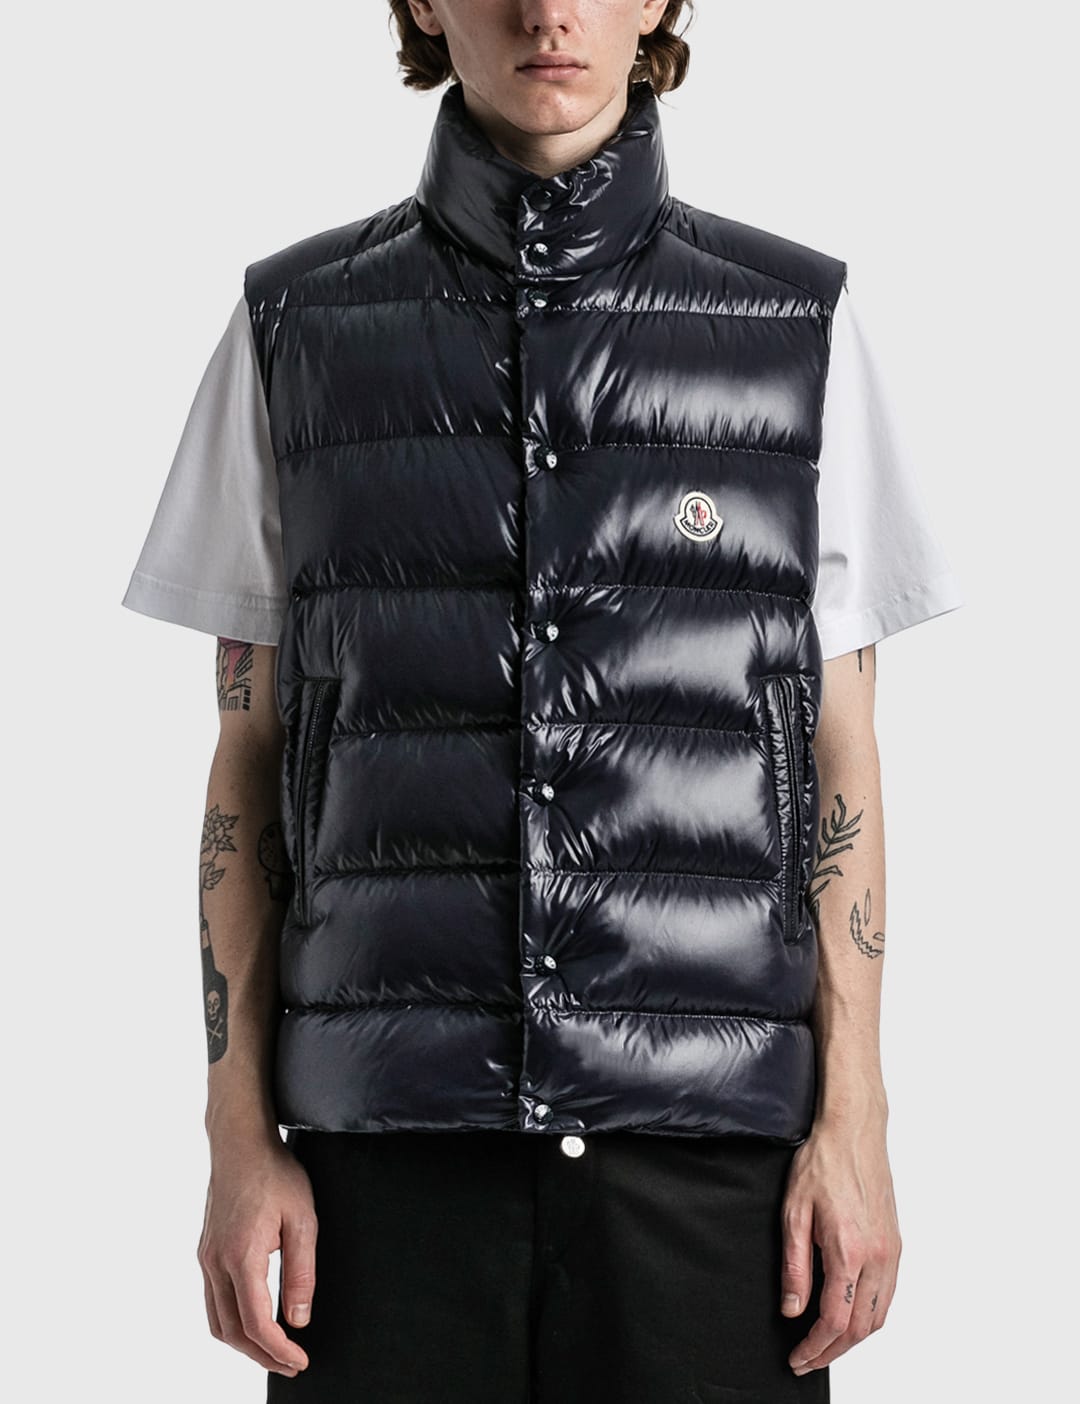 Moncler - Tibb Down Vest | HBX - Globally Curated Fashion and